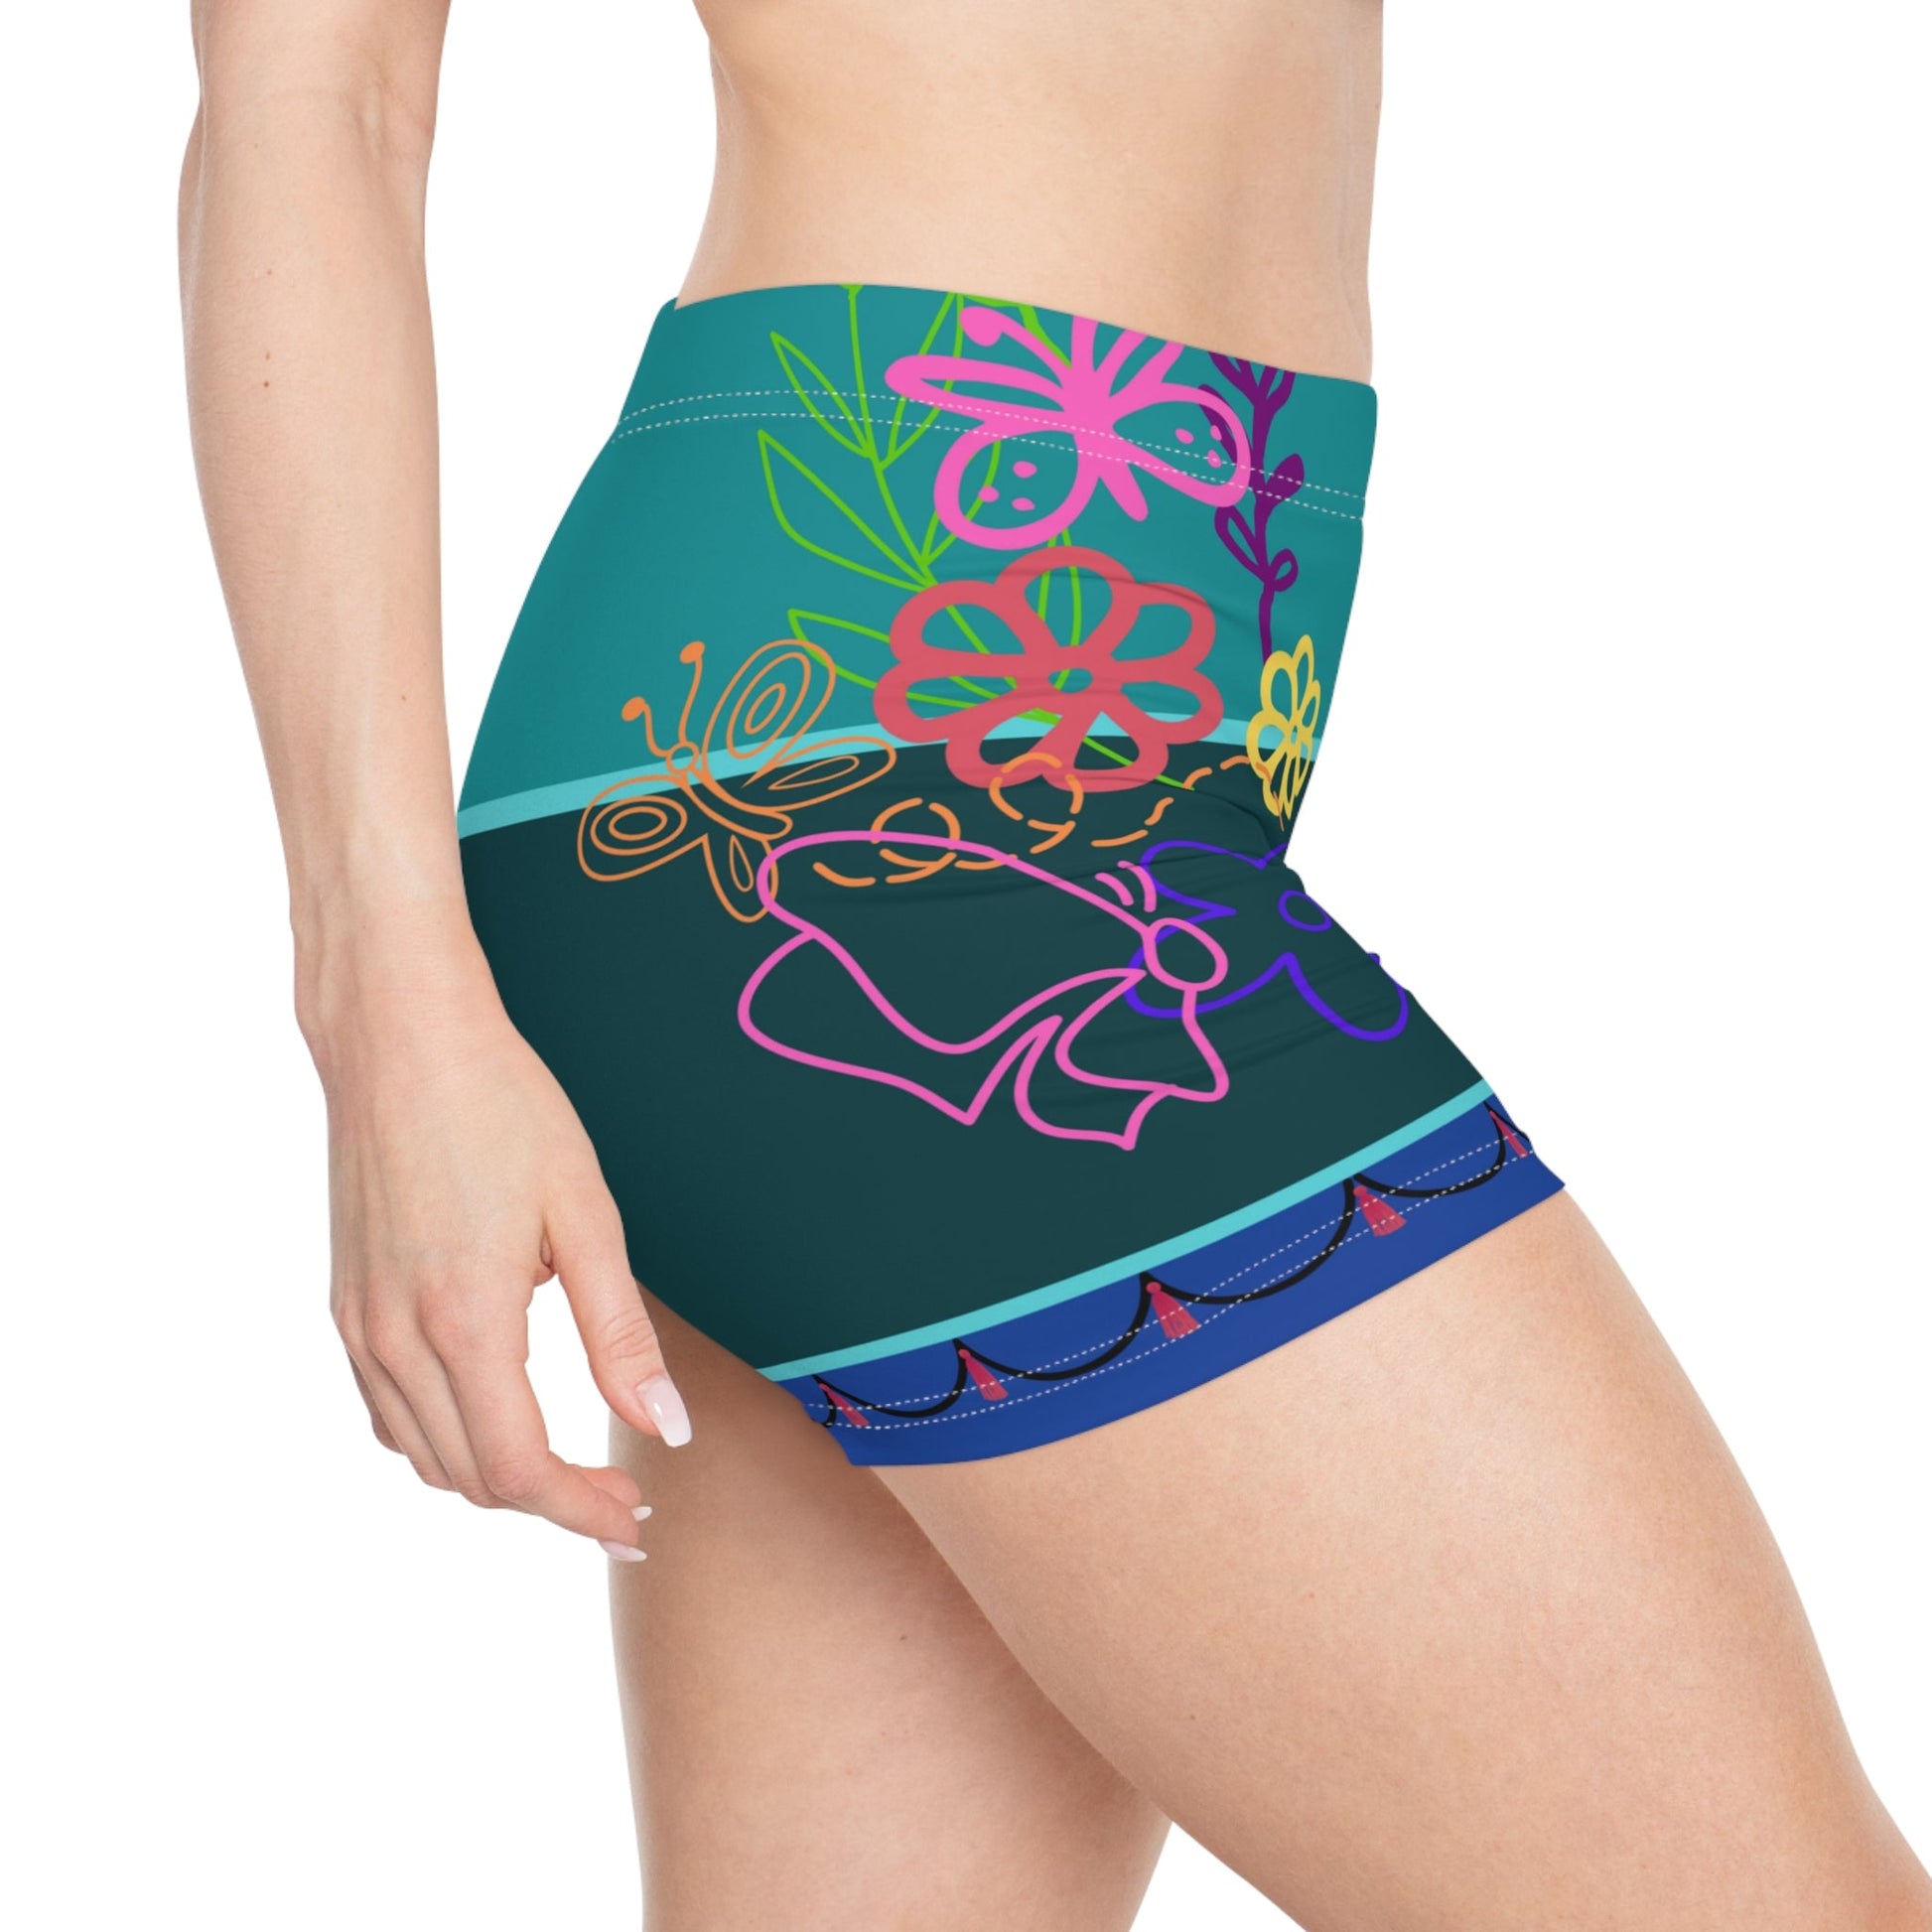 The Mirabel Women's Shorts - Running Costume, Cosplay, Bounding All Over PrintAOPAdult ShortsLittle Lady Shay Boutique